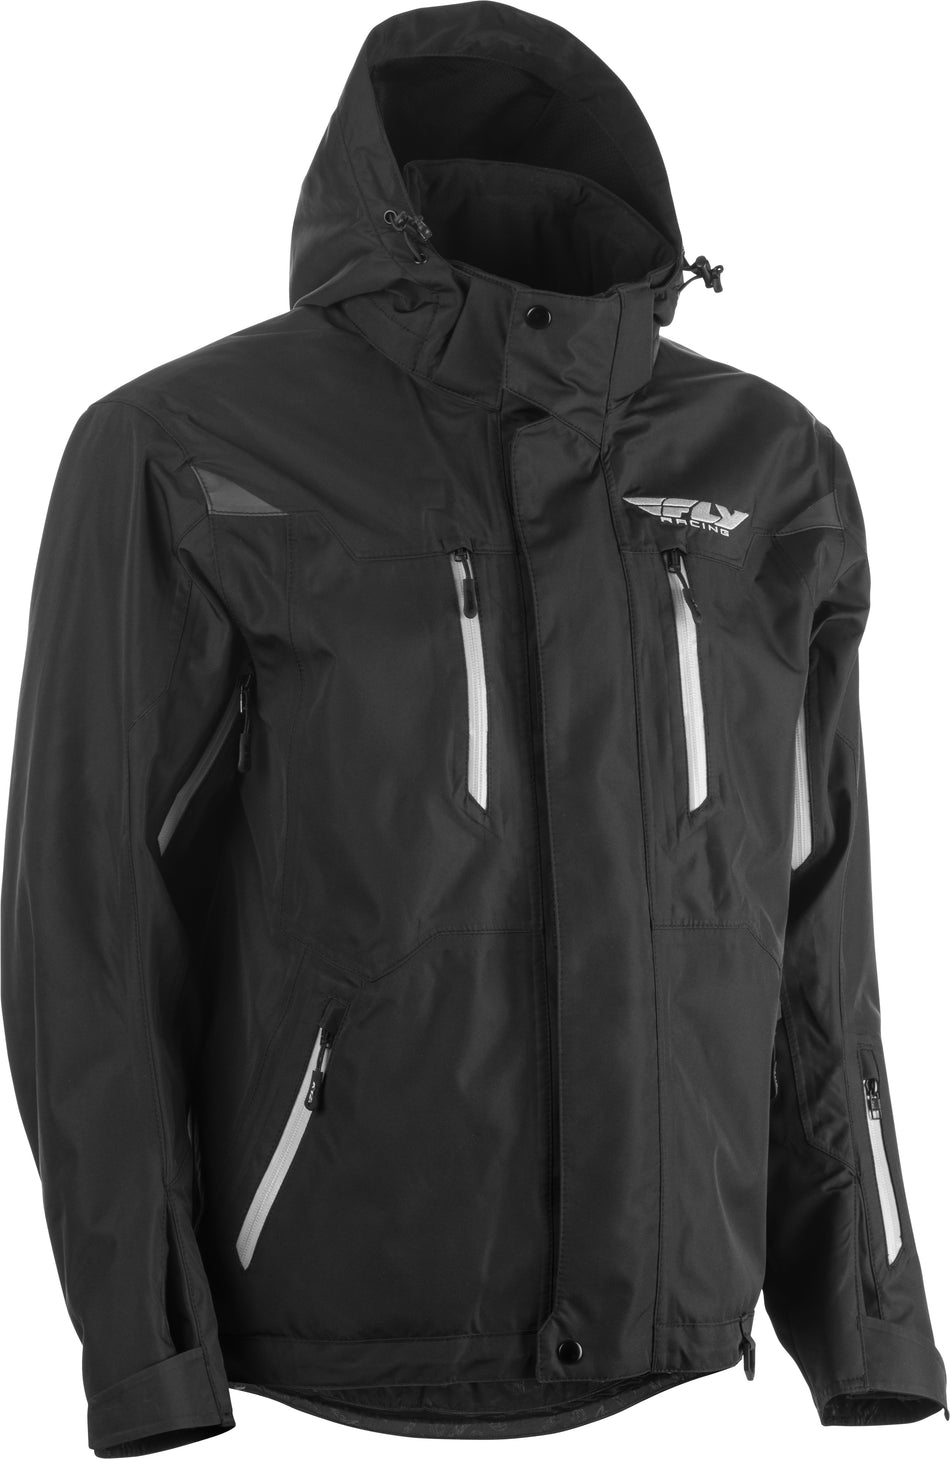 FLY RACING Fly Incline Jacket Black Md 470-4100M